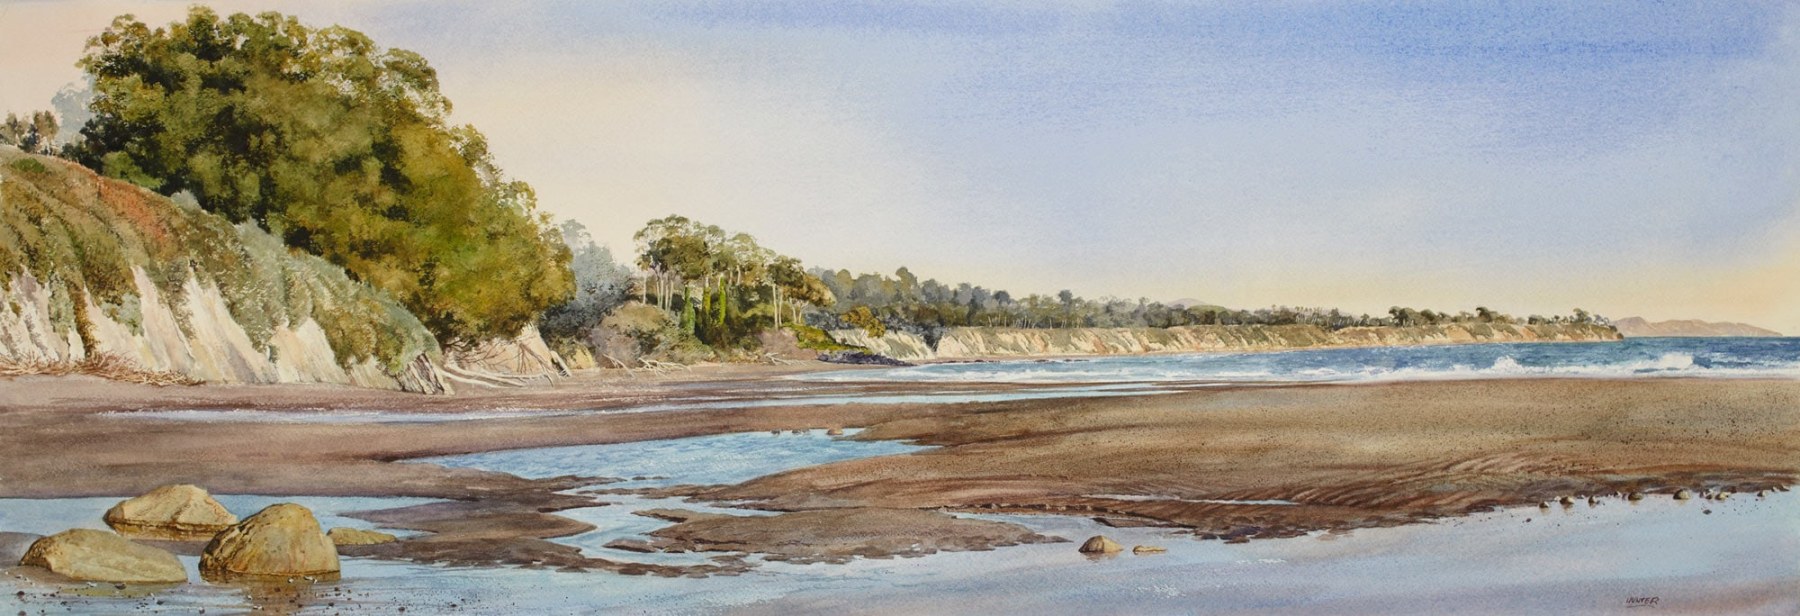 RAY HUNTER , After the Storm - Goleta Slough, 2019